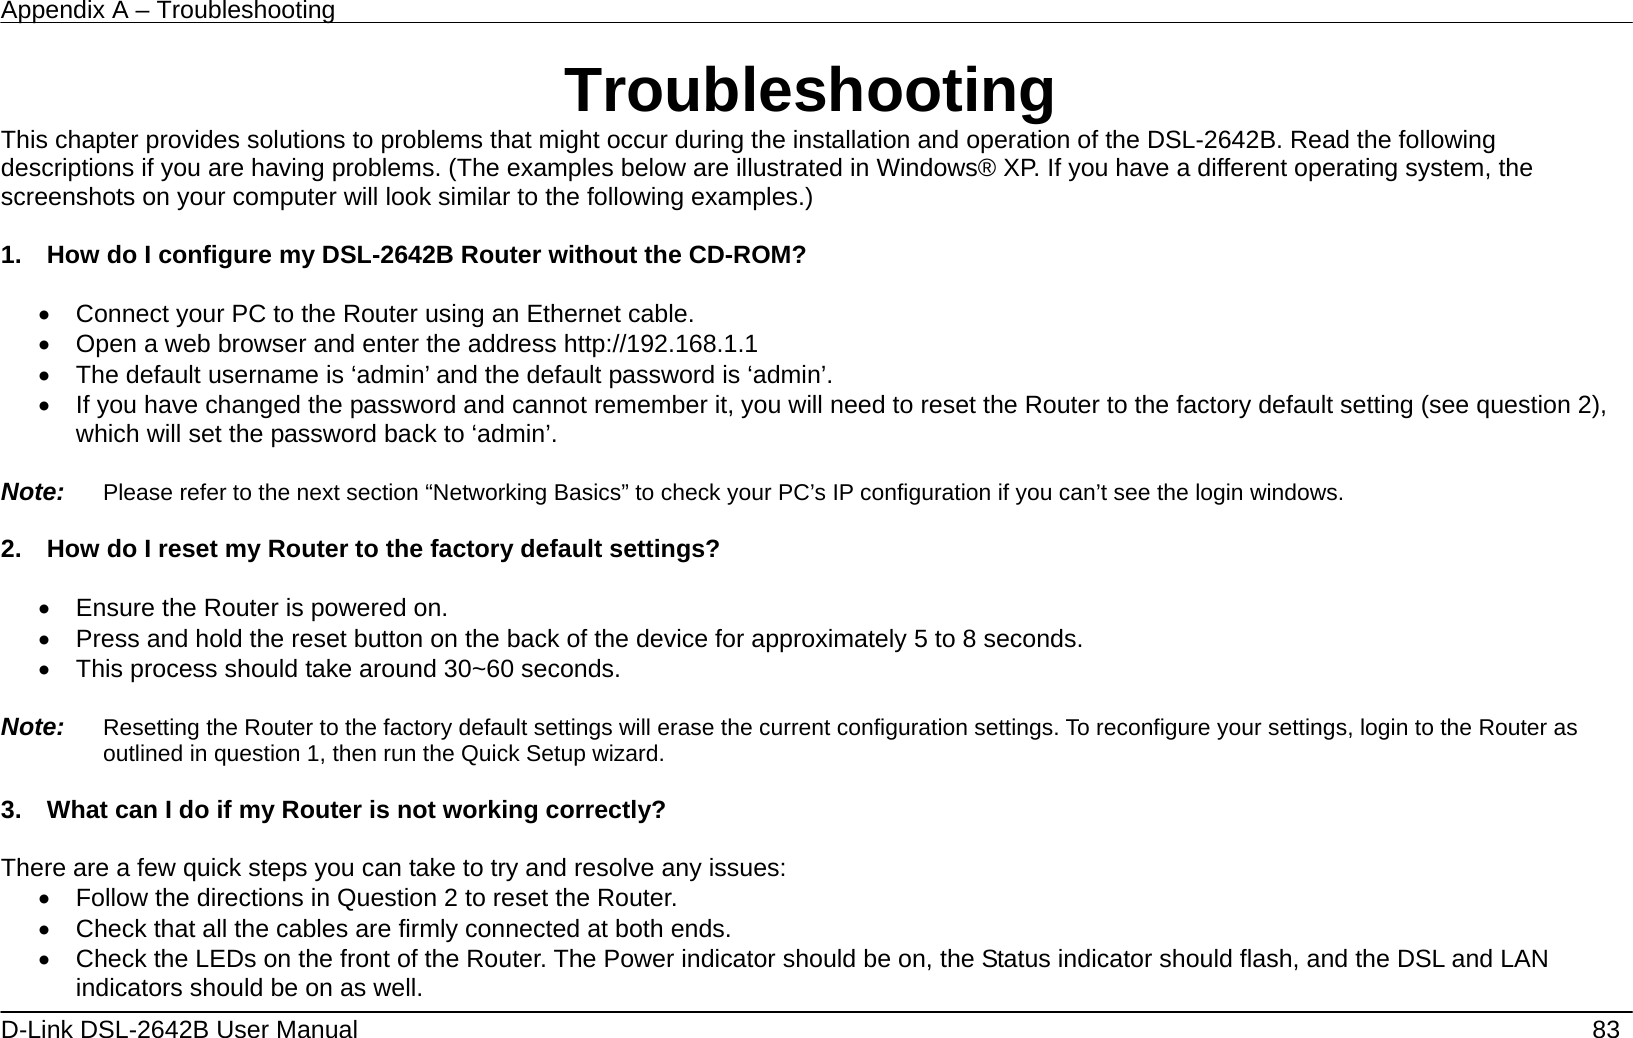 Appendix A – Troubleshooting   D-Link DSL-2642B User Manual    83 Troubleshooting This chapter provides solutions to problems that might occur during the installation and operation of the DSL-2642B. Read the following descriptions if you are having problems. (The examples below are illustrated in Windows® XP. If you have a different operating system, the screenshots on your computer will look similar to the following examples.)  1.    How do I configure my DSL-2642B Router without the CD-ROM?  •  Connect your PC to the Router using an Ethernet cable. •  Open a web browser and enter the address http://192.168.1.1 •  The default username is ‘admin’ and the default password is ‘admin’. •  If you have changed the password and cannot remember it, you will need to reset the Router to the factory default setting (see question 2), which will set the password back to ‘admin’.  Note:   Please refer to the next section “Networking Basics” to check your PC’s IP configuration if you can’t see the login windows.  2.    How do I reset my Router to the factory default settings?  •  Ensure the Router is powered on. •  Press and hold the reset button on the back of the device for approximately 5 to 8 seconds. •  This process should take around 30~60 seconds.    Note:   Resetting the Router to the factory default settings will erase the current configuration settings. To reconfigure your settings, login to the Router as outlined in question 1, then run the Quick Setup wizard.  3.    What can I do if my Router is not working correctly?  There are a few quick steps you can take to try and resolve any issues: •  Follow the directions in Question 2 to reset the Router. •  Check that all the cables are firmly connected at both ends. •  Check the LEDs on the front of the Router. The Power indicator should be on, the Status indicator should flash, and the DSL and LAN indicators should be on as well. 